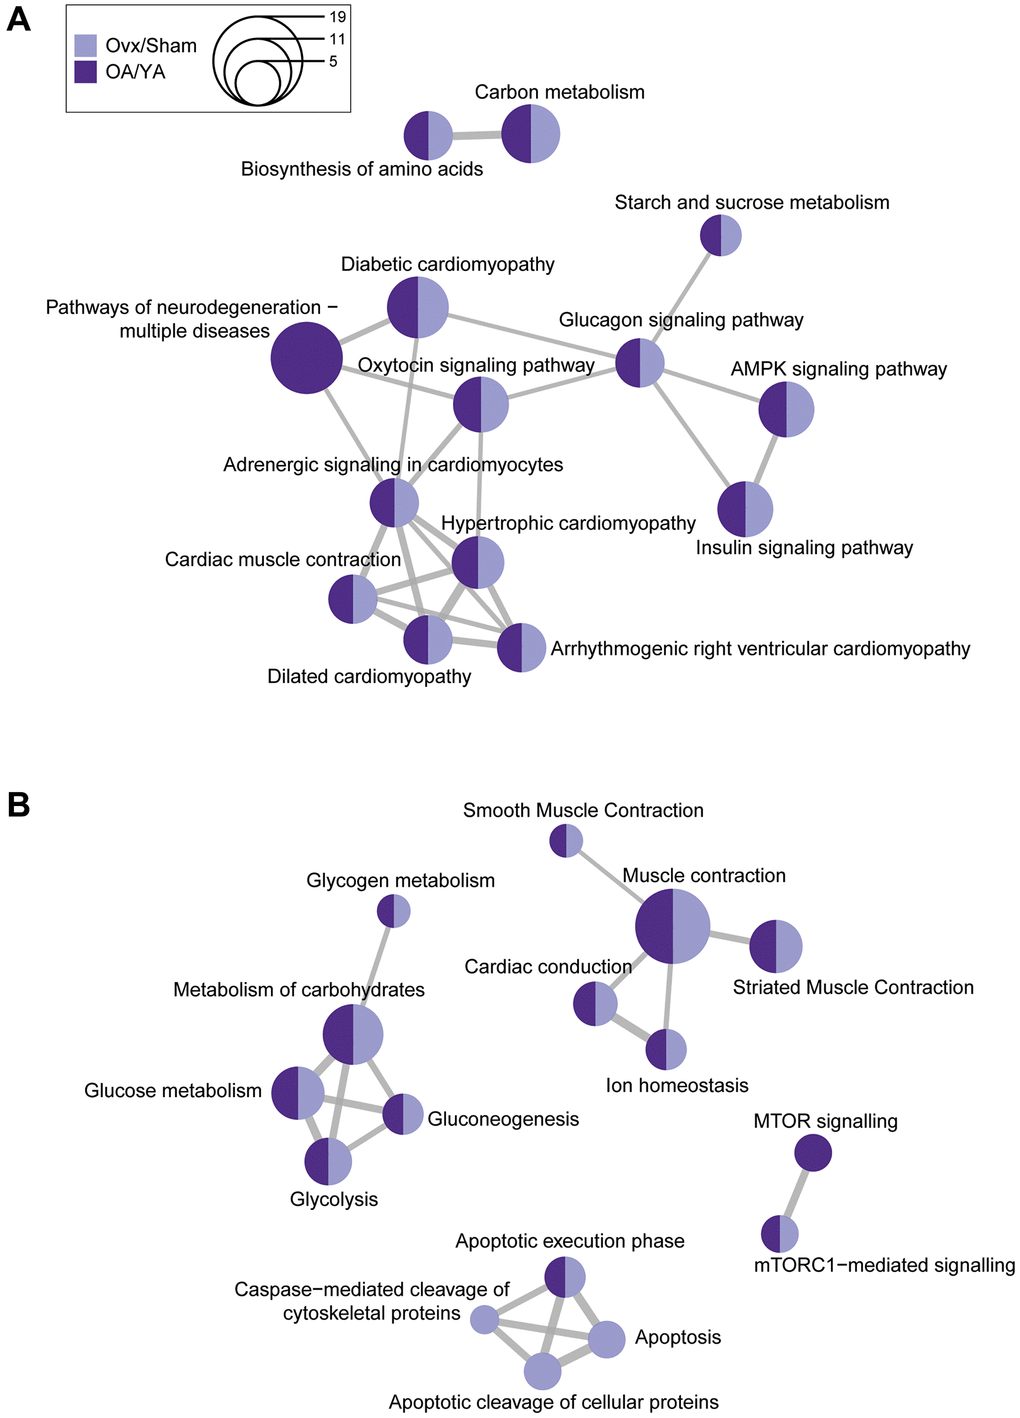 Comparative KEGG and Reactome pathway enrichment analysis between Ovx/Sham and OA/YA. Significant and differentially regulated phosphopeptides (adjusted p-value A) KEGG and (B) Reactome pathways were clustered using K-means clustering. The size of the circle represents the number of proteins associated to the pathway, and the connecting lines represents the strength of the similarity (i.e., shorter and thicker lines correspond to stronger similarity and inversely.